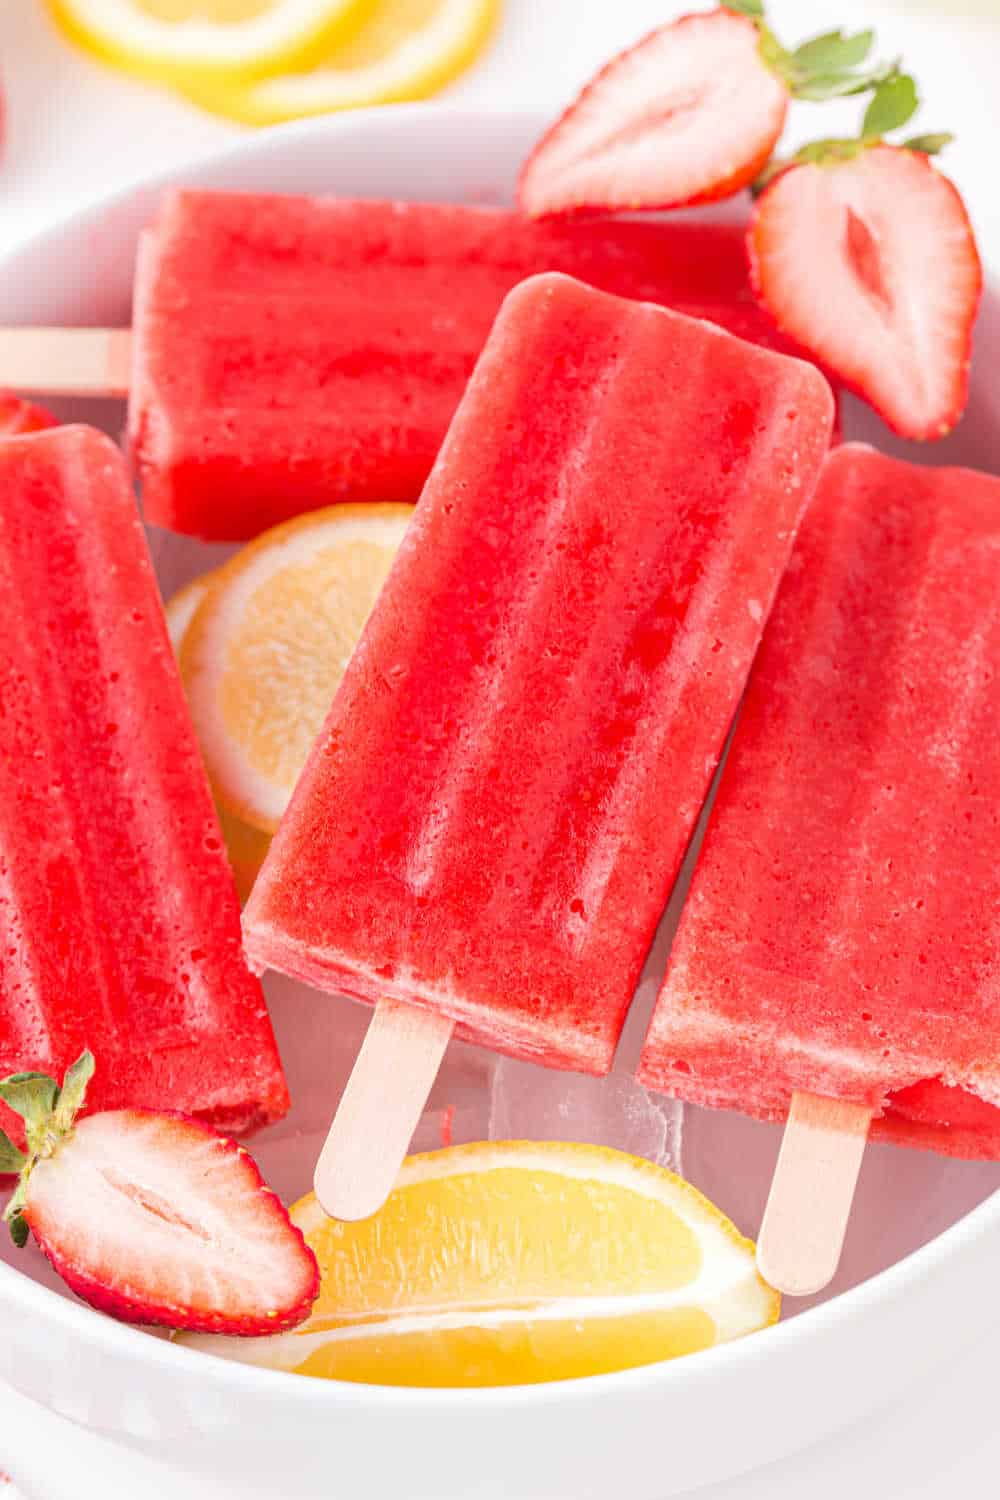 Strawberry lemonade popsicles in a bowl of ice.